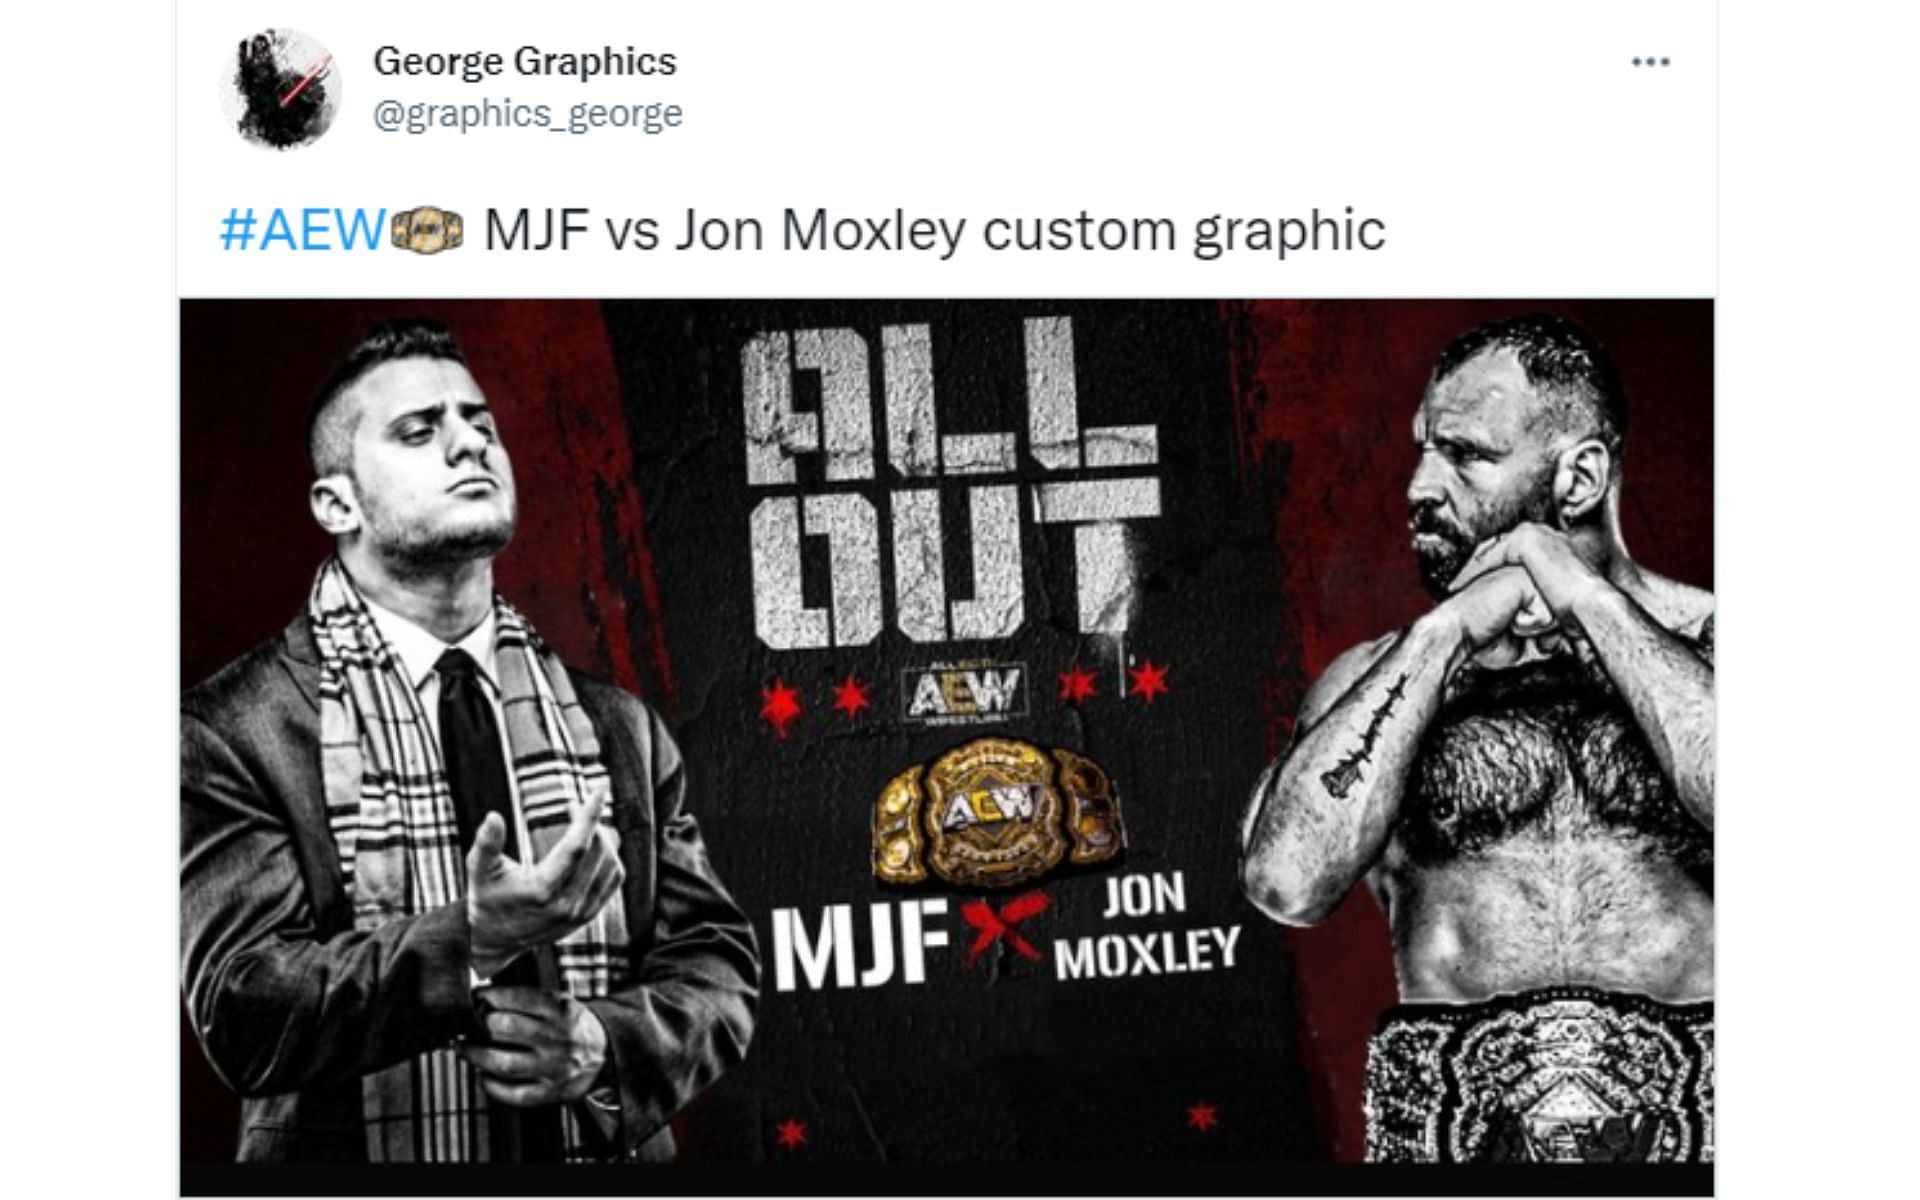 MJF and Jon Moxley first competed against each other in 2019